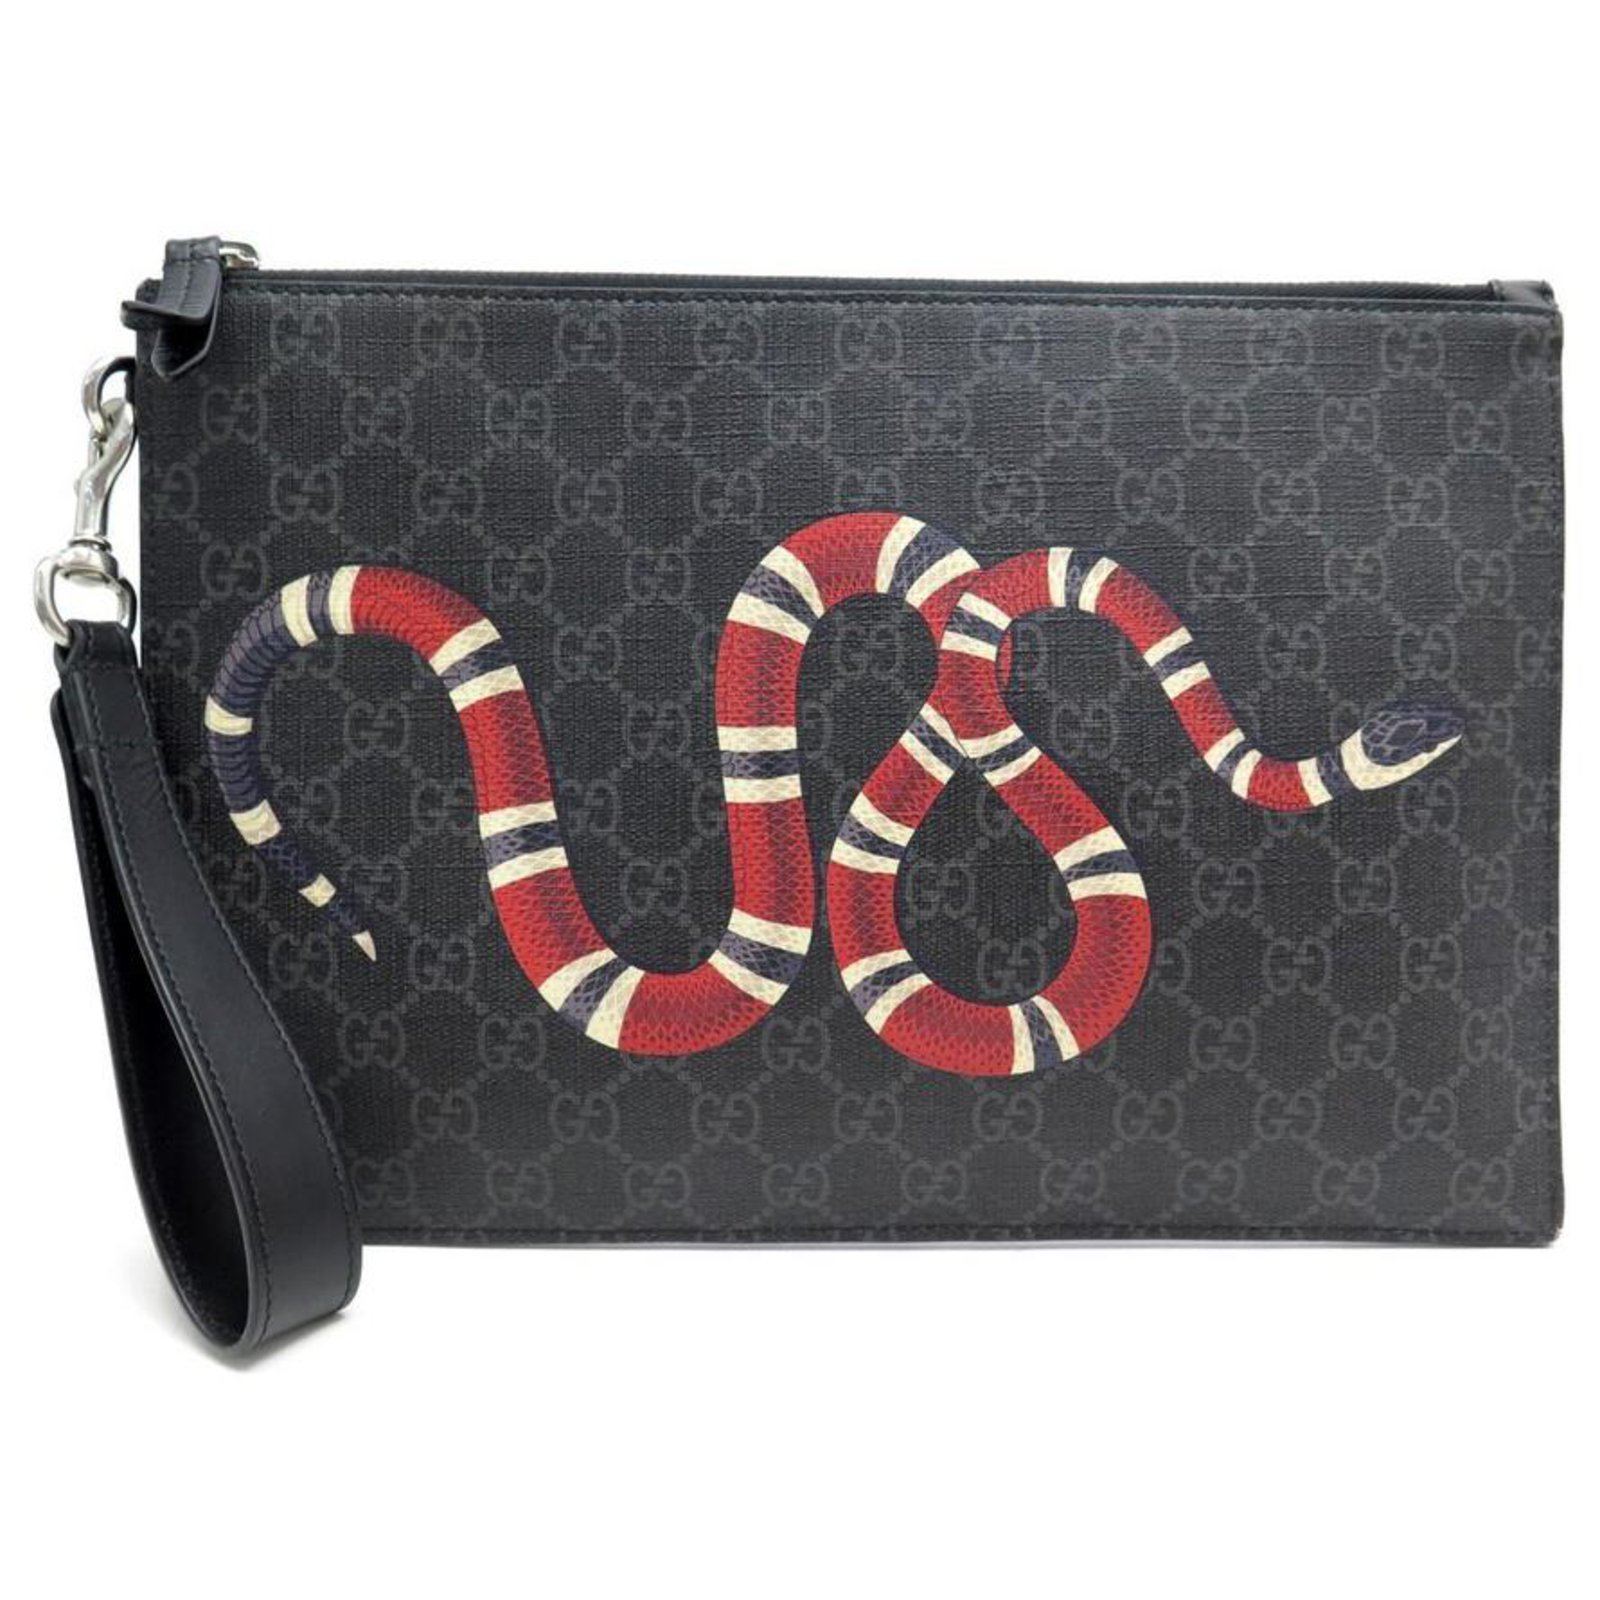 Black snake Gucci wallet, Accessories